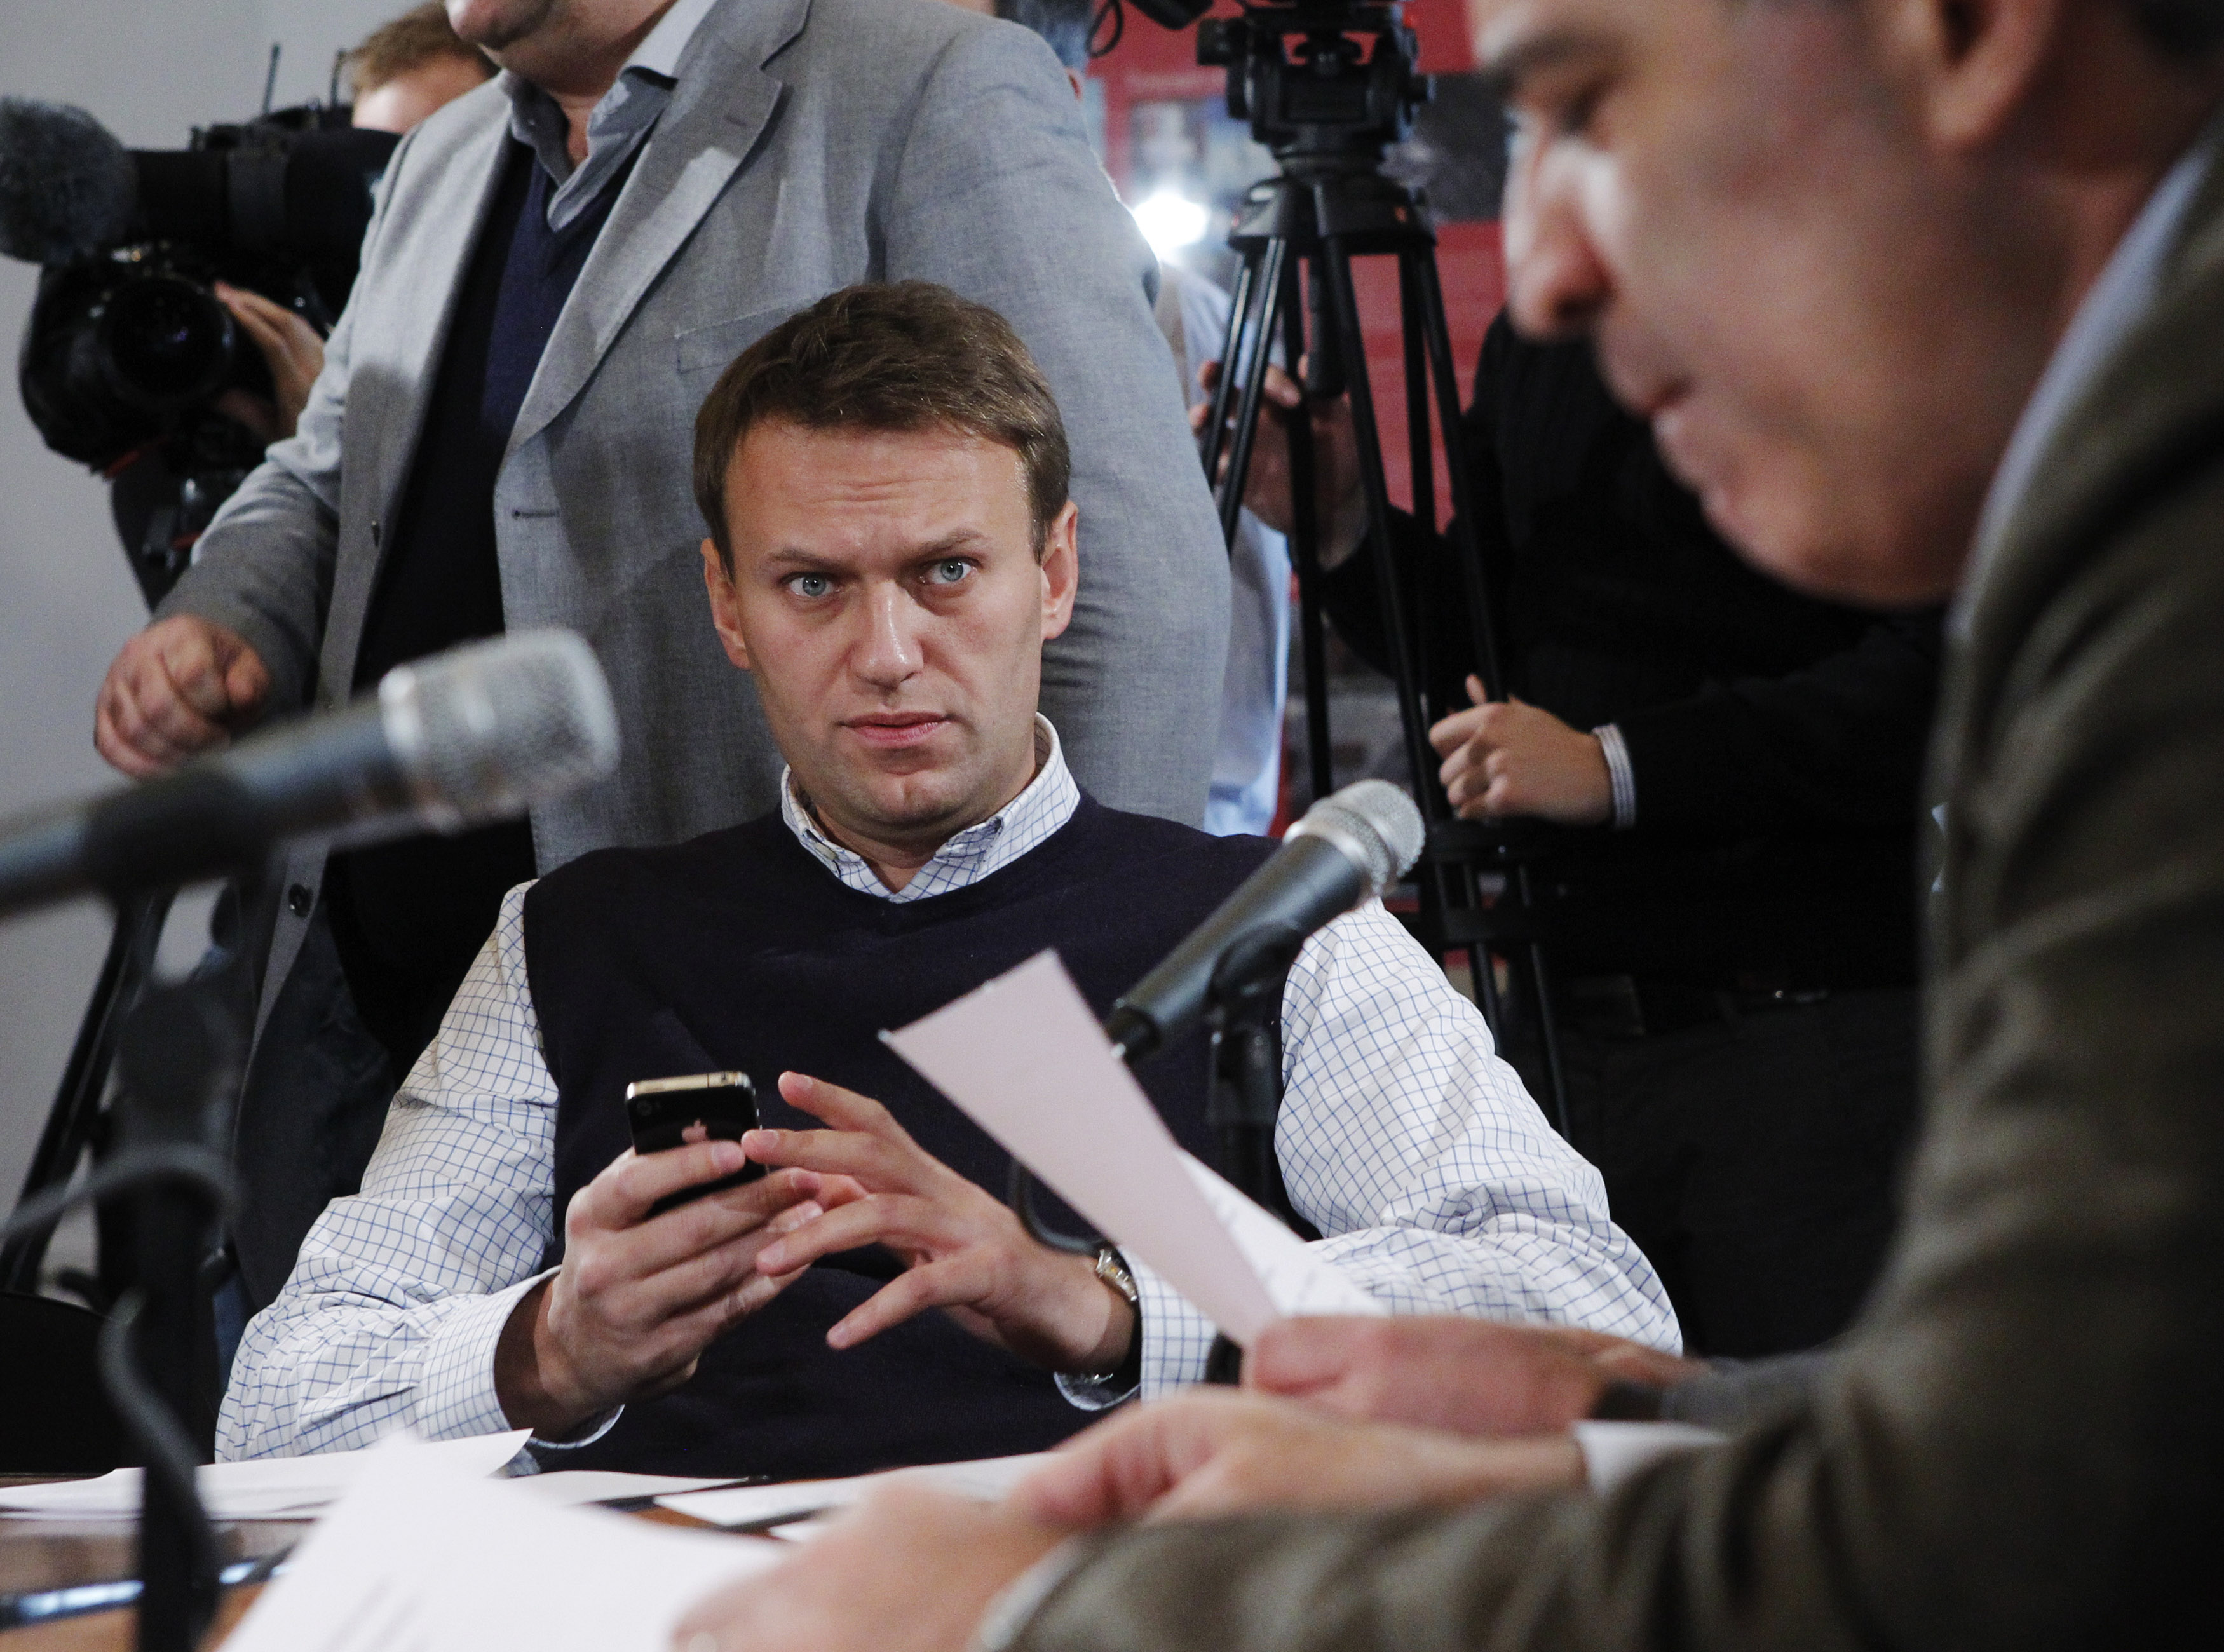 Navalny listens to opposition leader Garry Kasparov as a committee meets in January 2012 to discuss a new protest in Moscow.